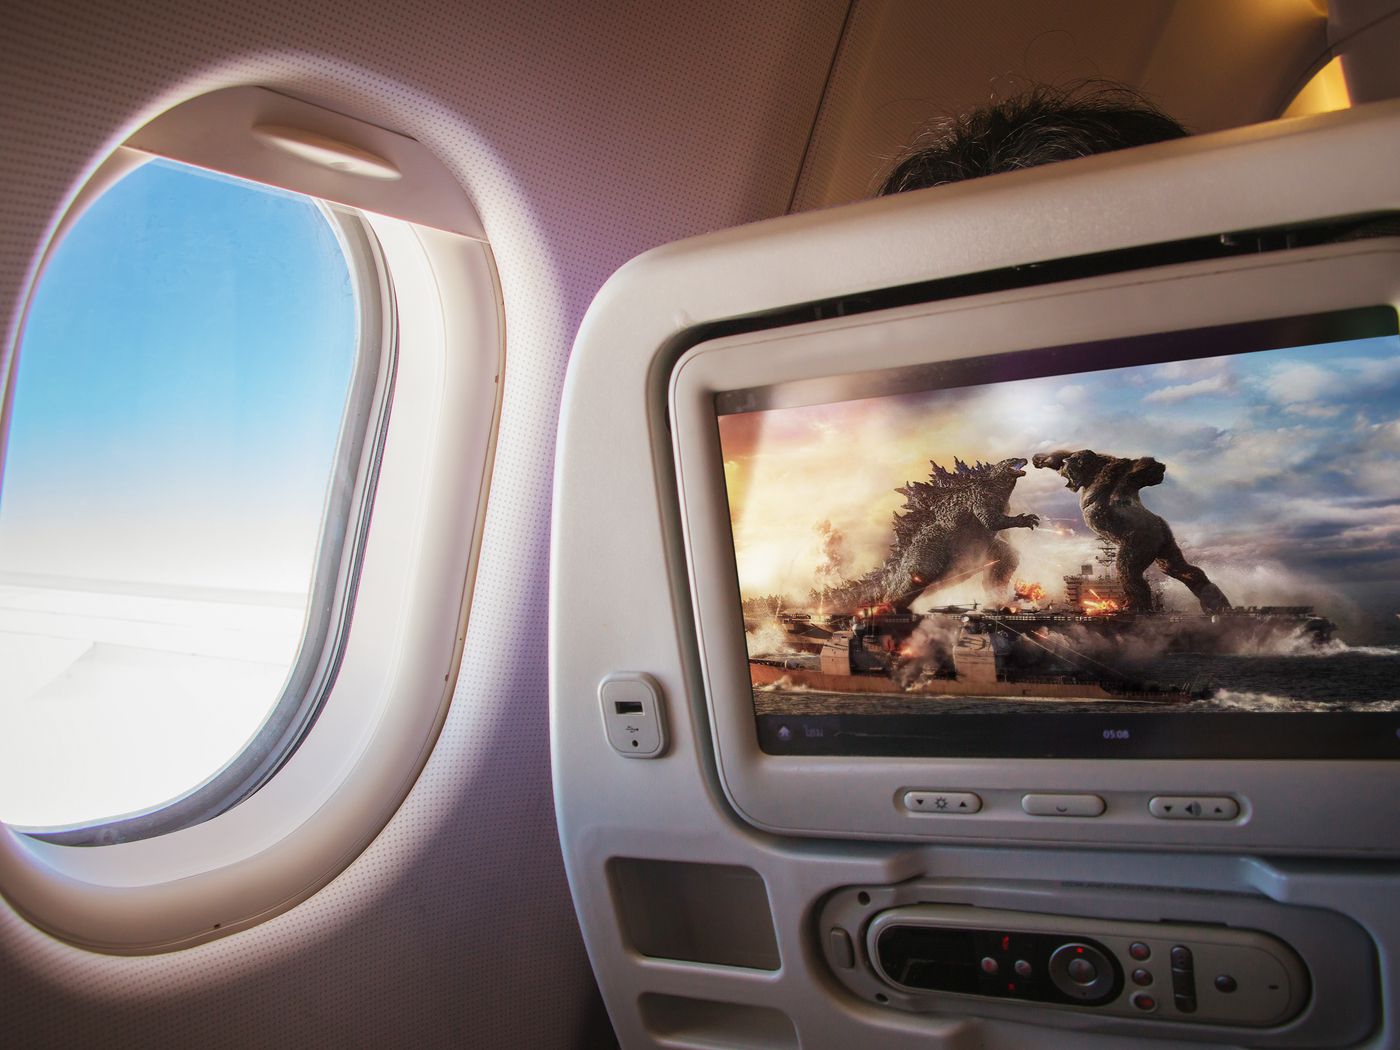 How To Download Movie To Watch On Plane